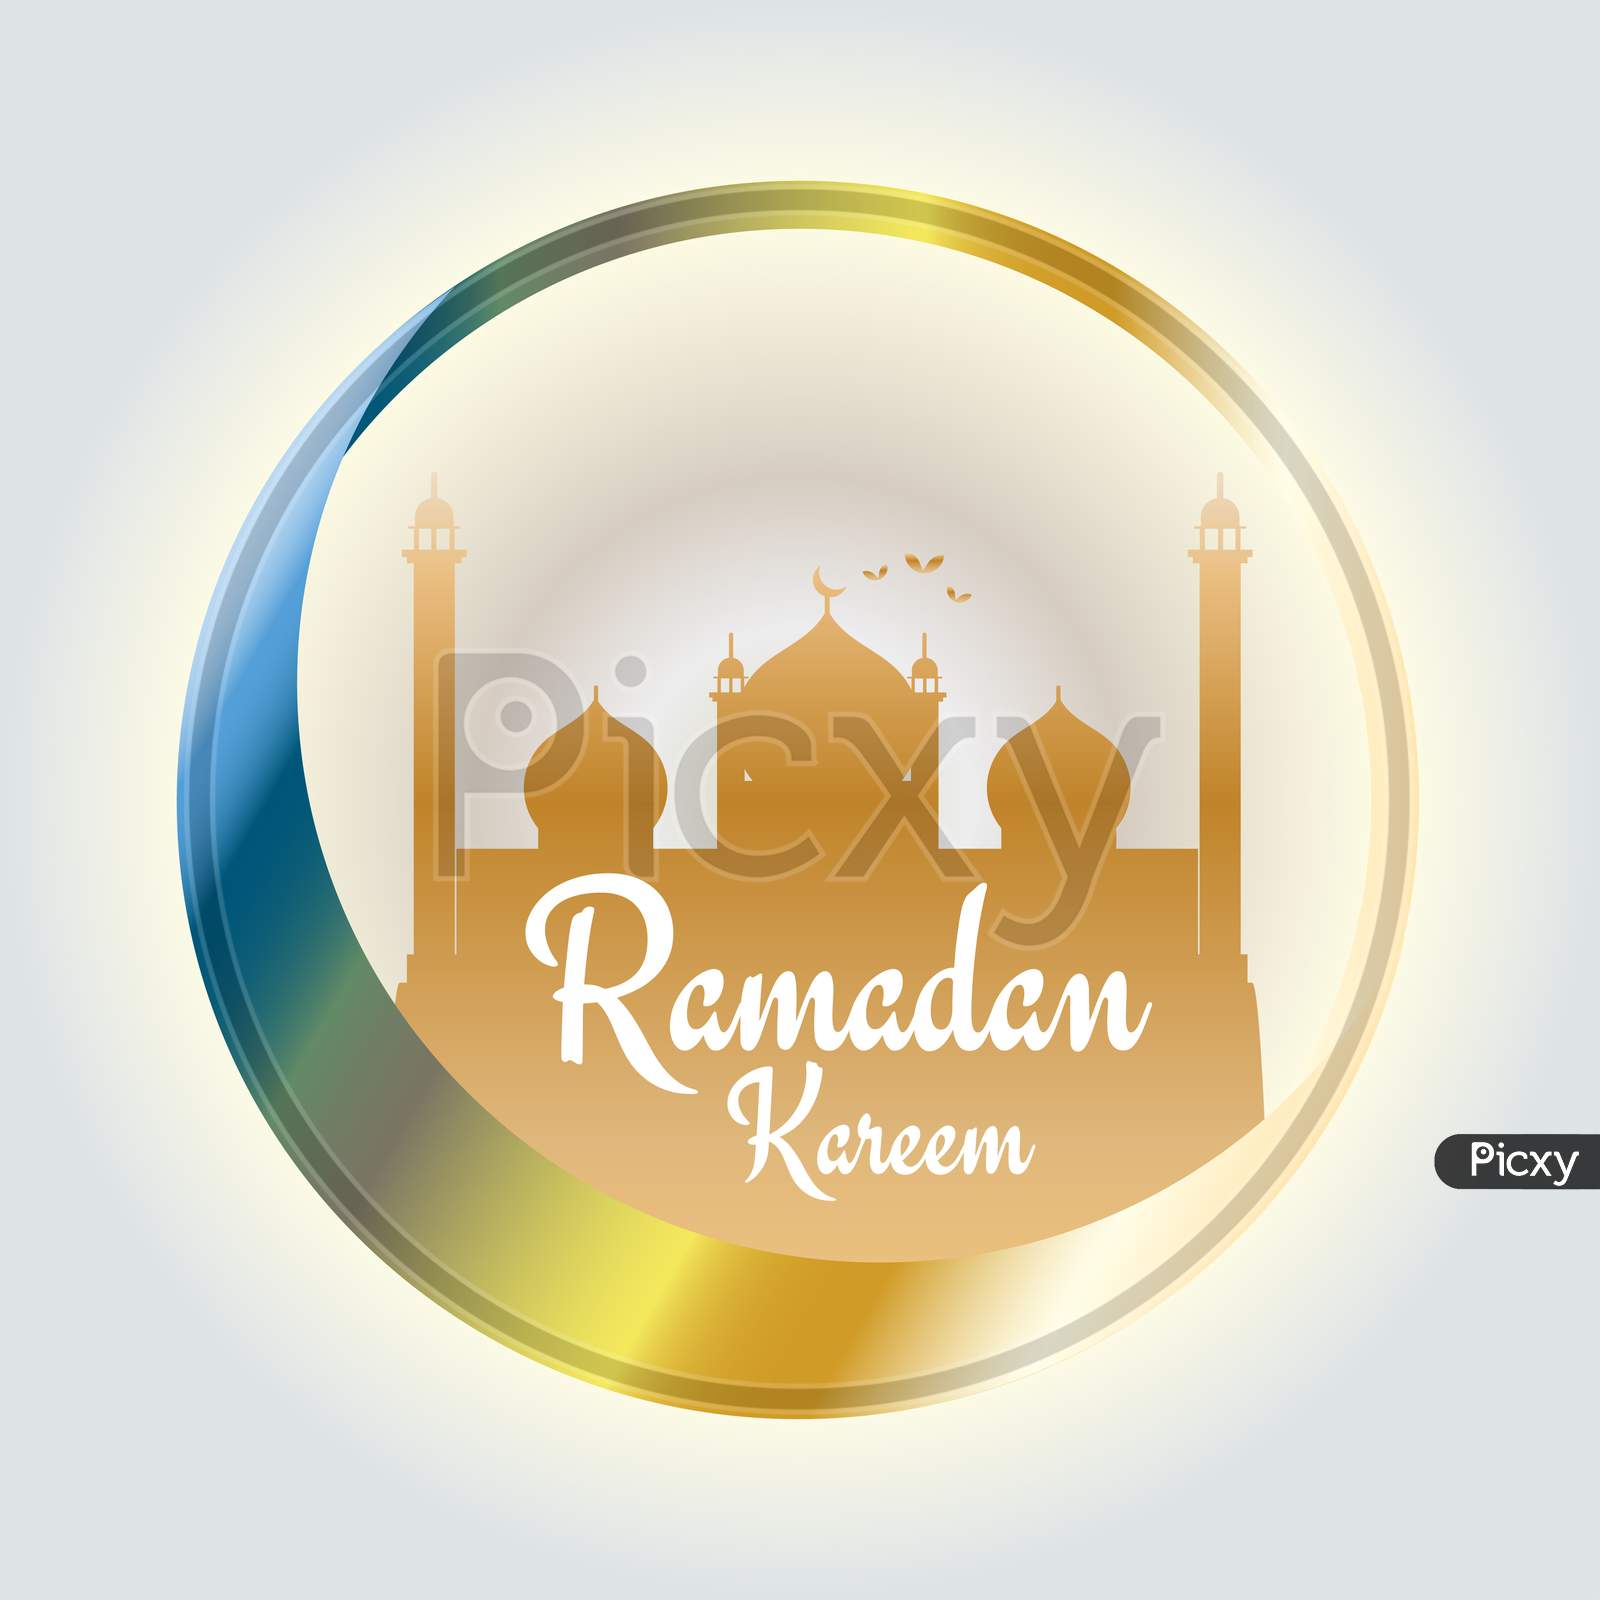 Ramadan Kareem Greeting Poster Template With Crescent Moon And Mosque Illustration, Vector